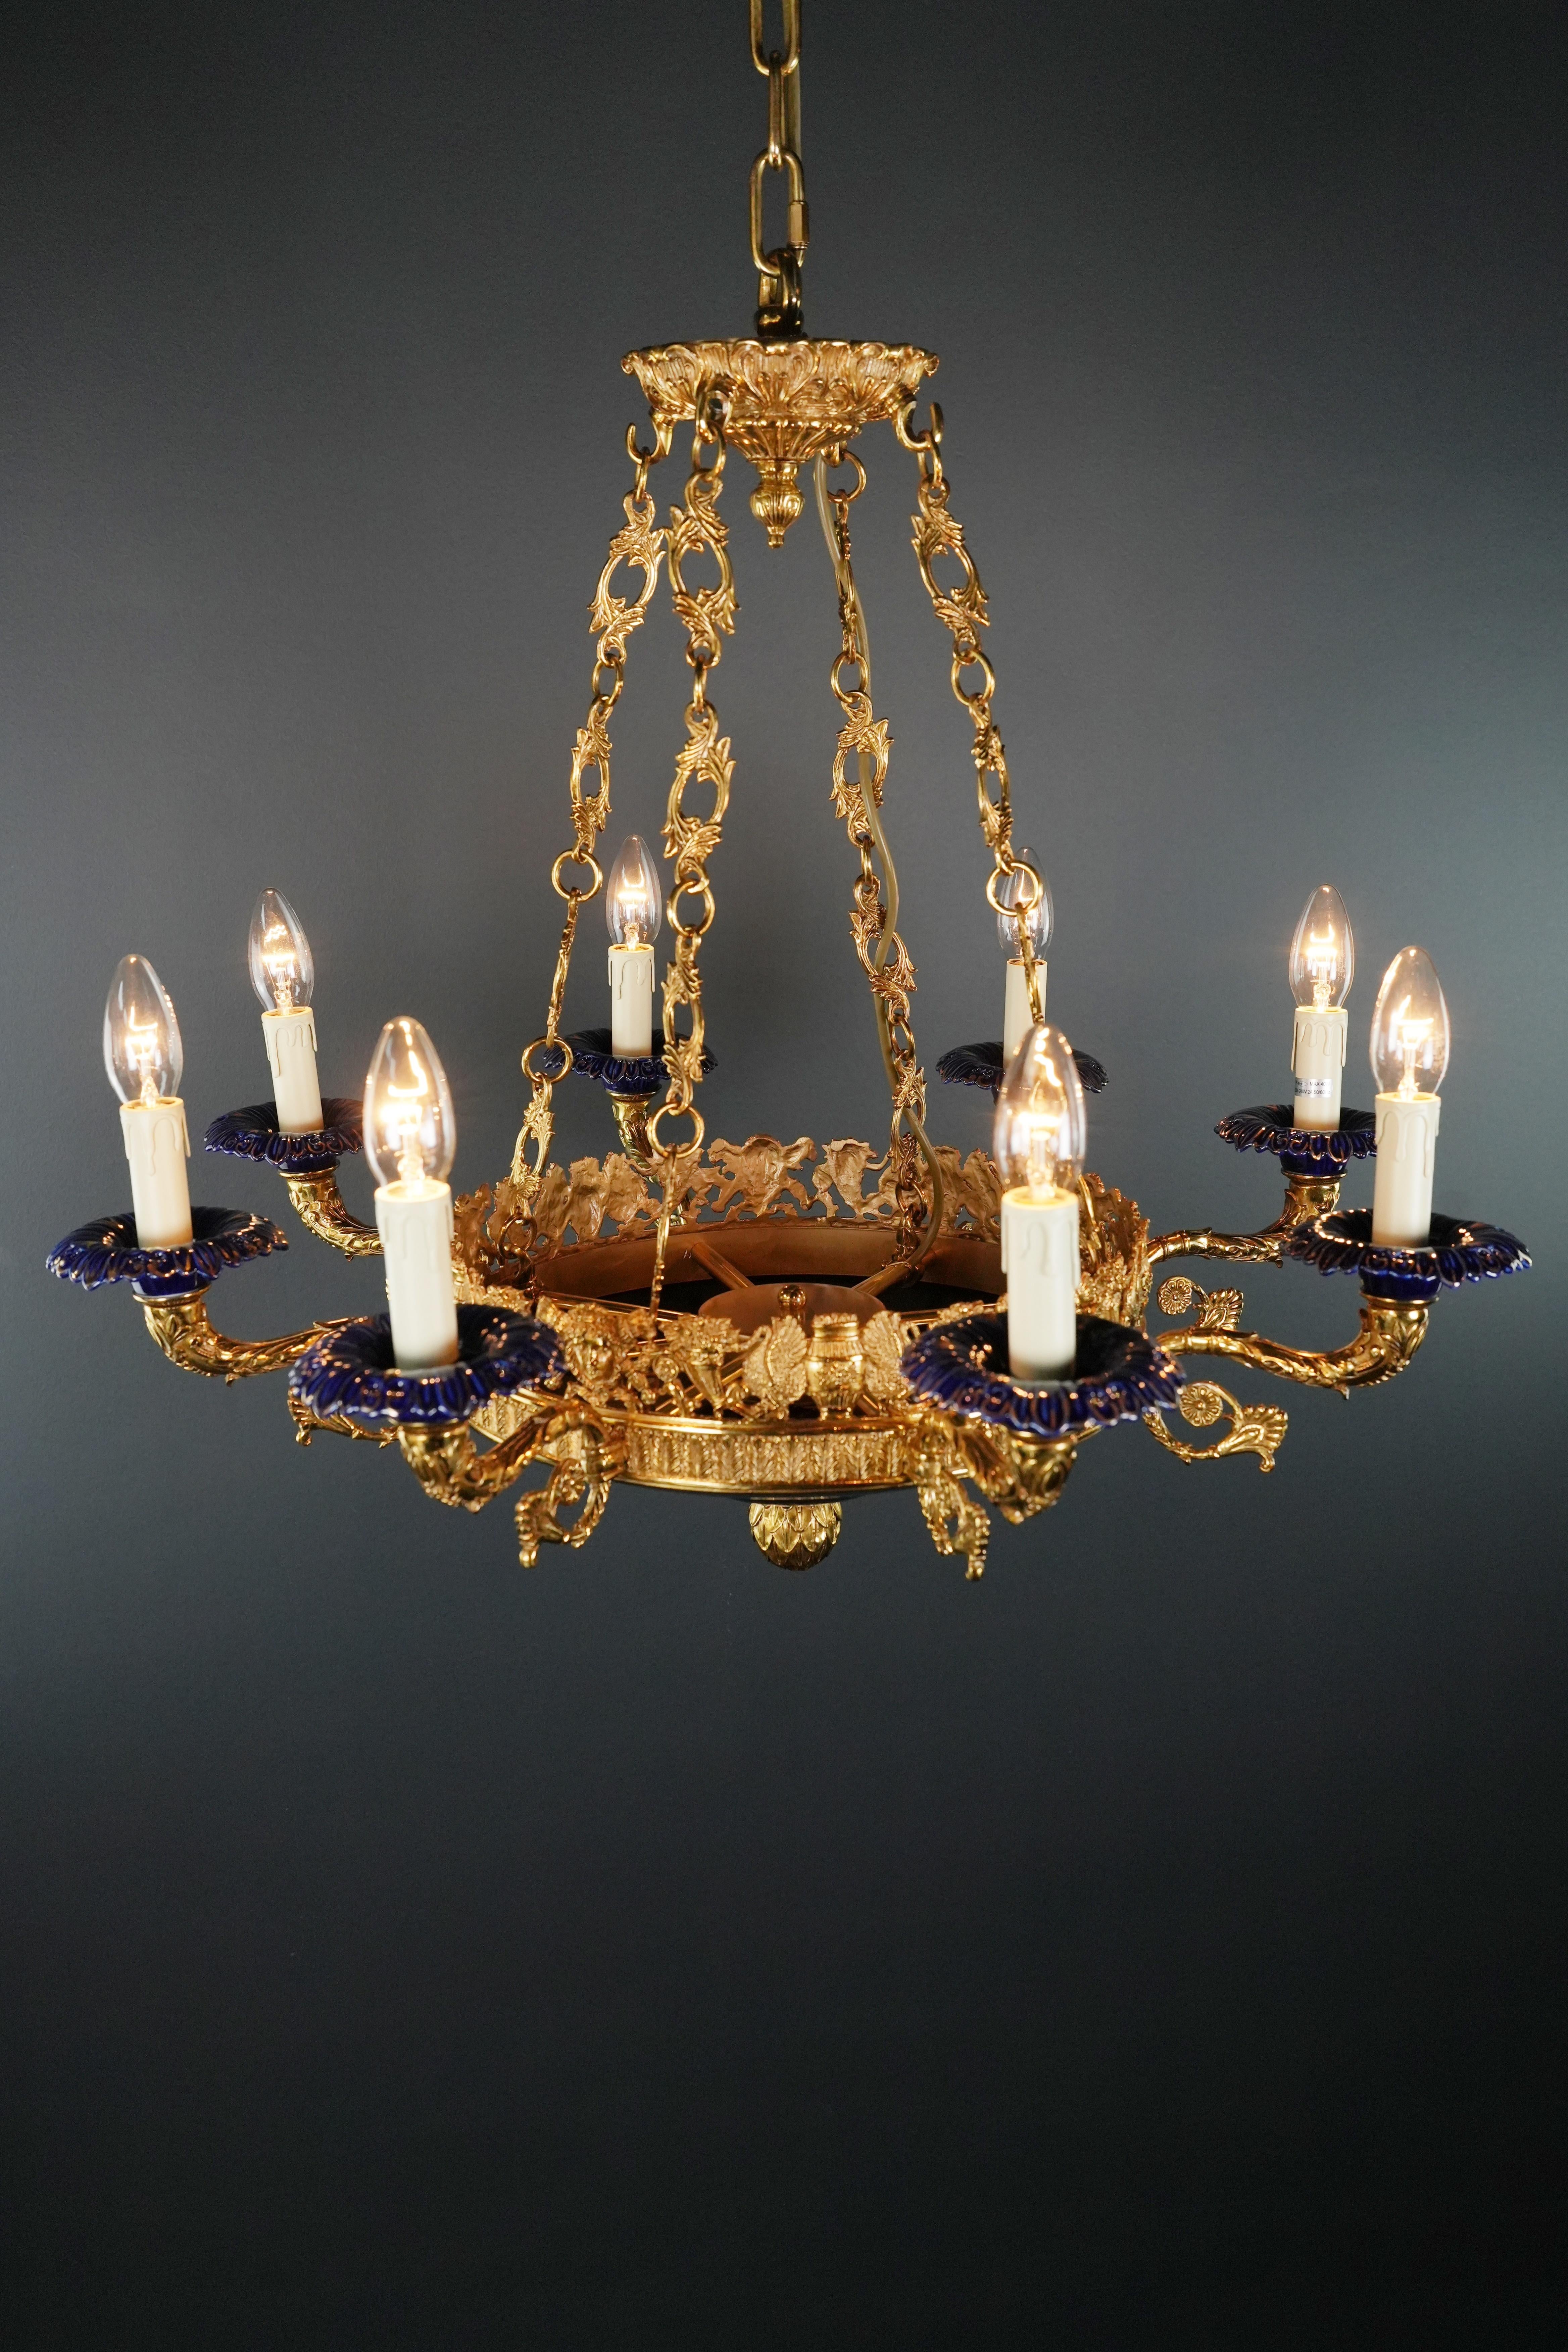 Contemporary Peacock Bird French Brass Empire Chandelier Lustre Lamp Antique Gold Art Deco For Sale